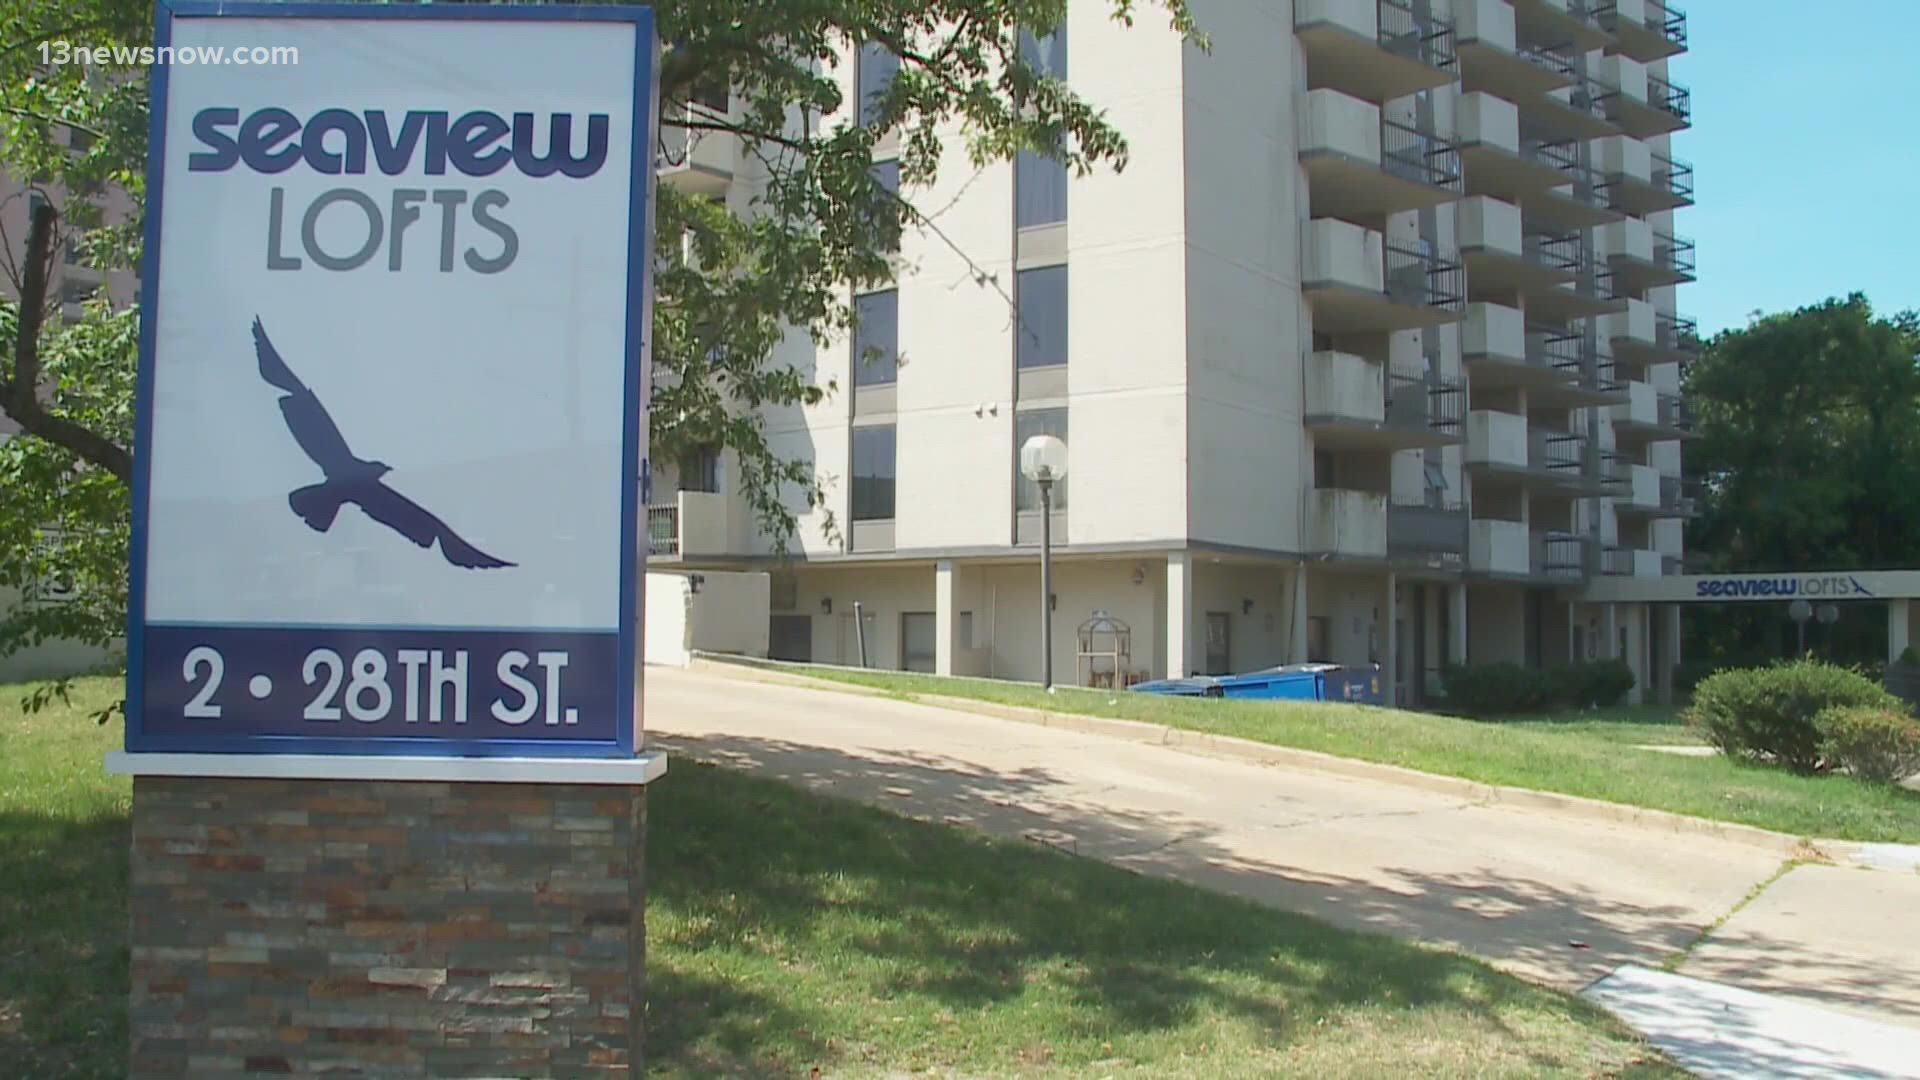 A status hearing this morning in Newport News confirmed: there are still code issues with the elevators and fire alarm system at Seaview Lofts apartments.